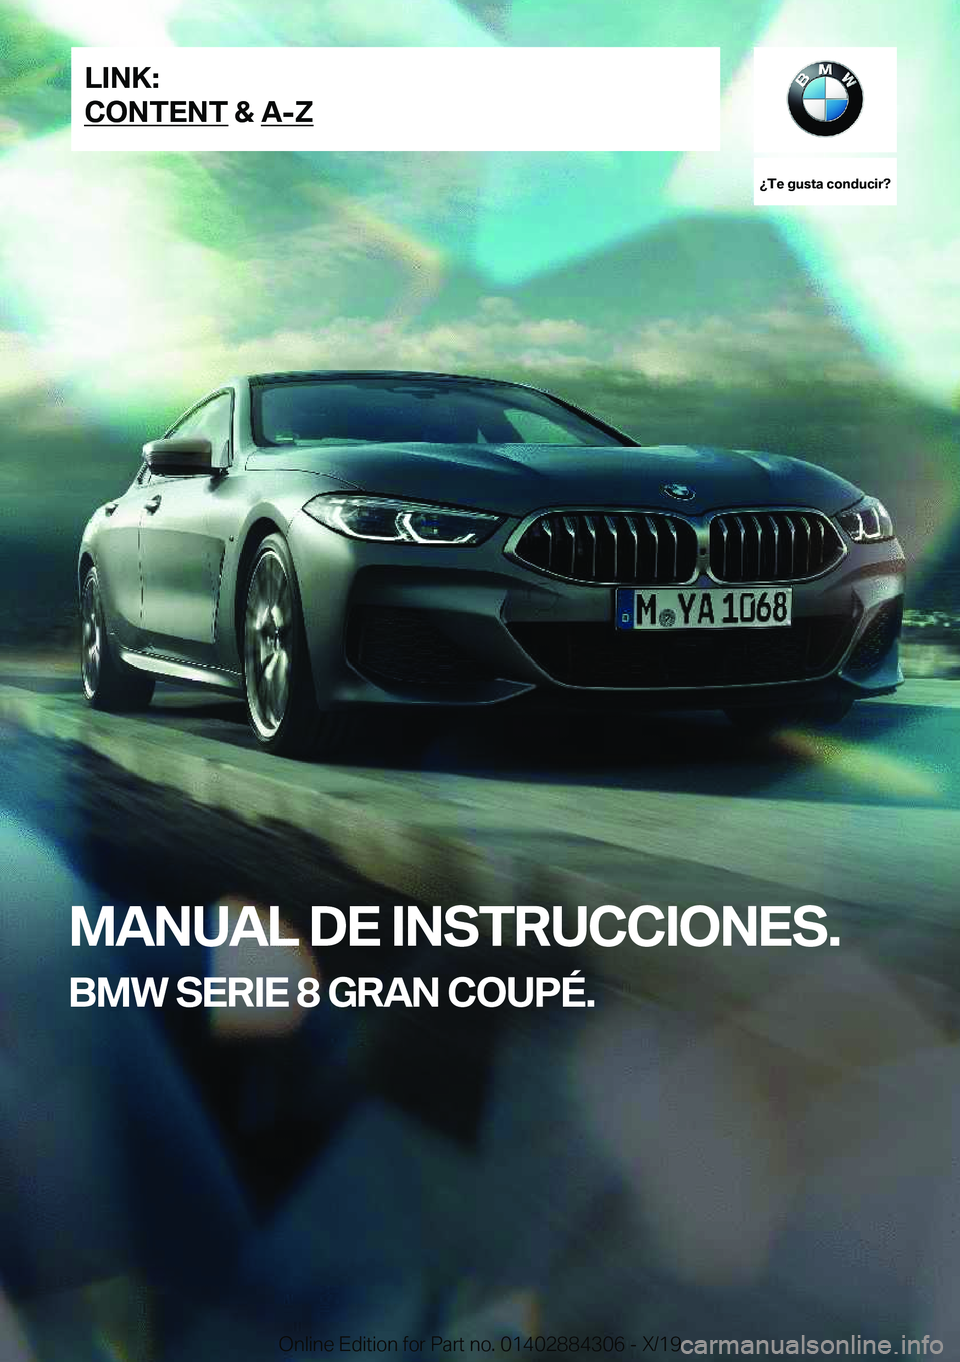 BMW 8 SERIES GRAN COUPE 2020  Manuales de Empleo (in Spanish) ��T�e��g�u�s�t�a��c�o�n�d�u�c�i�r� 
�M�A�N�U�A�L��D�E��I�N�S�T�R�U�C�C�I�O�N�E�S�.
�B�M�W��S�E�R�I�E��8��G�R�A�N��C�O�U�P�